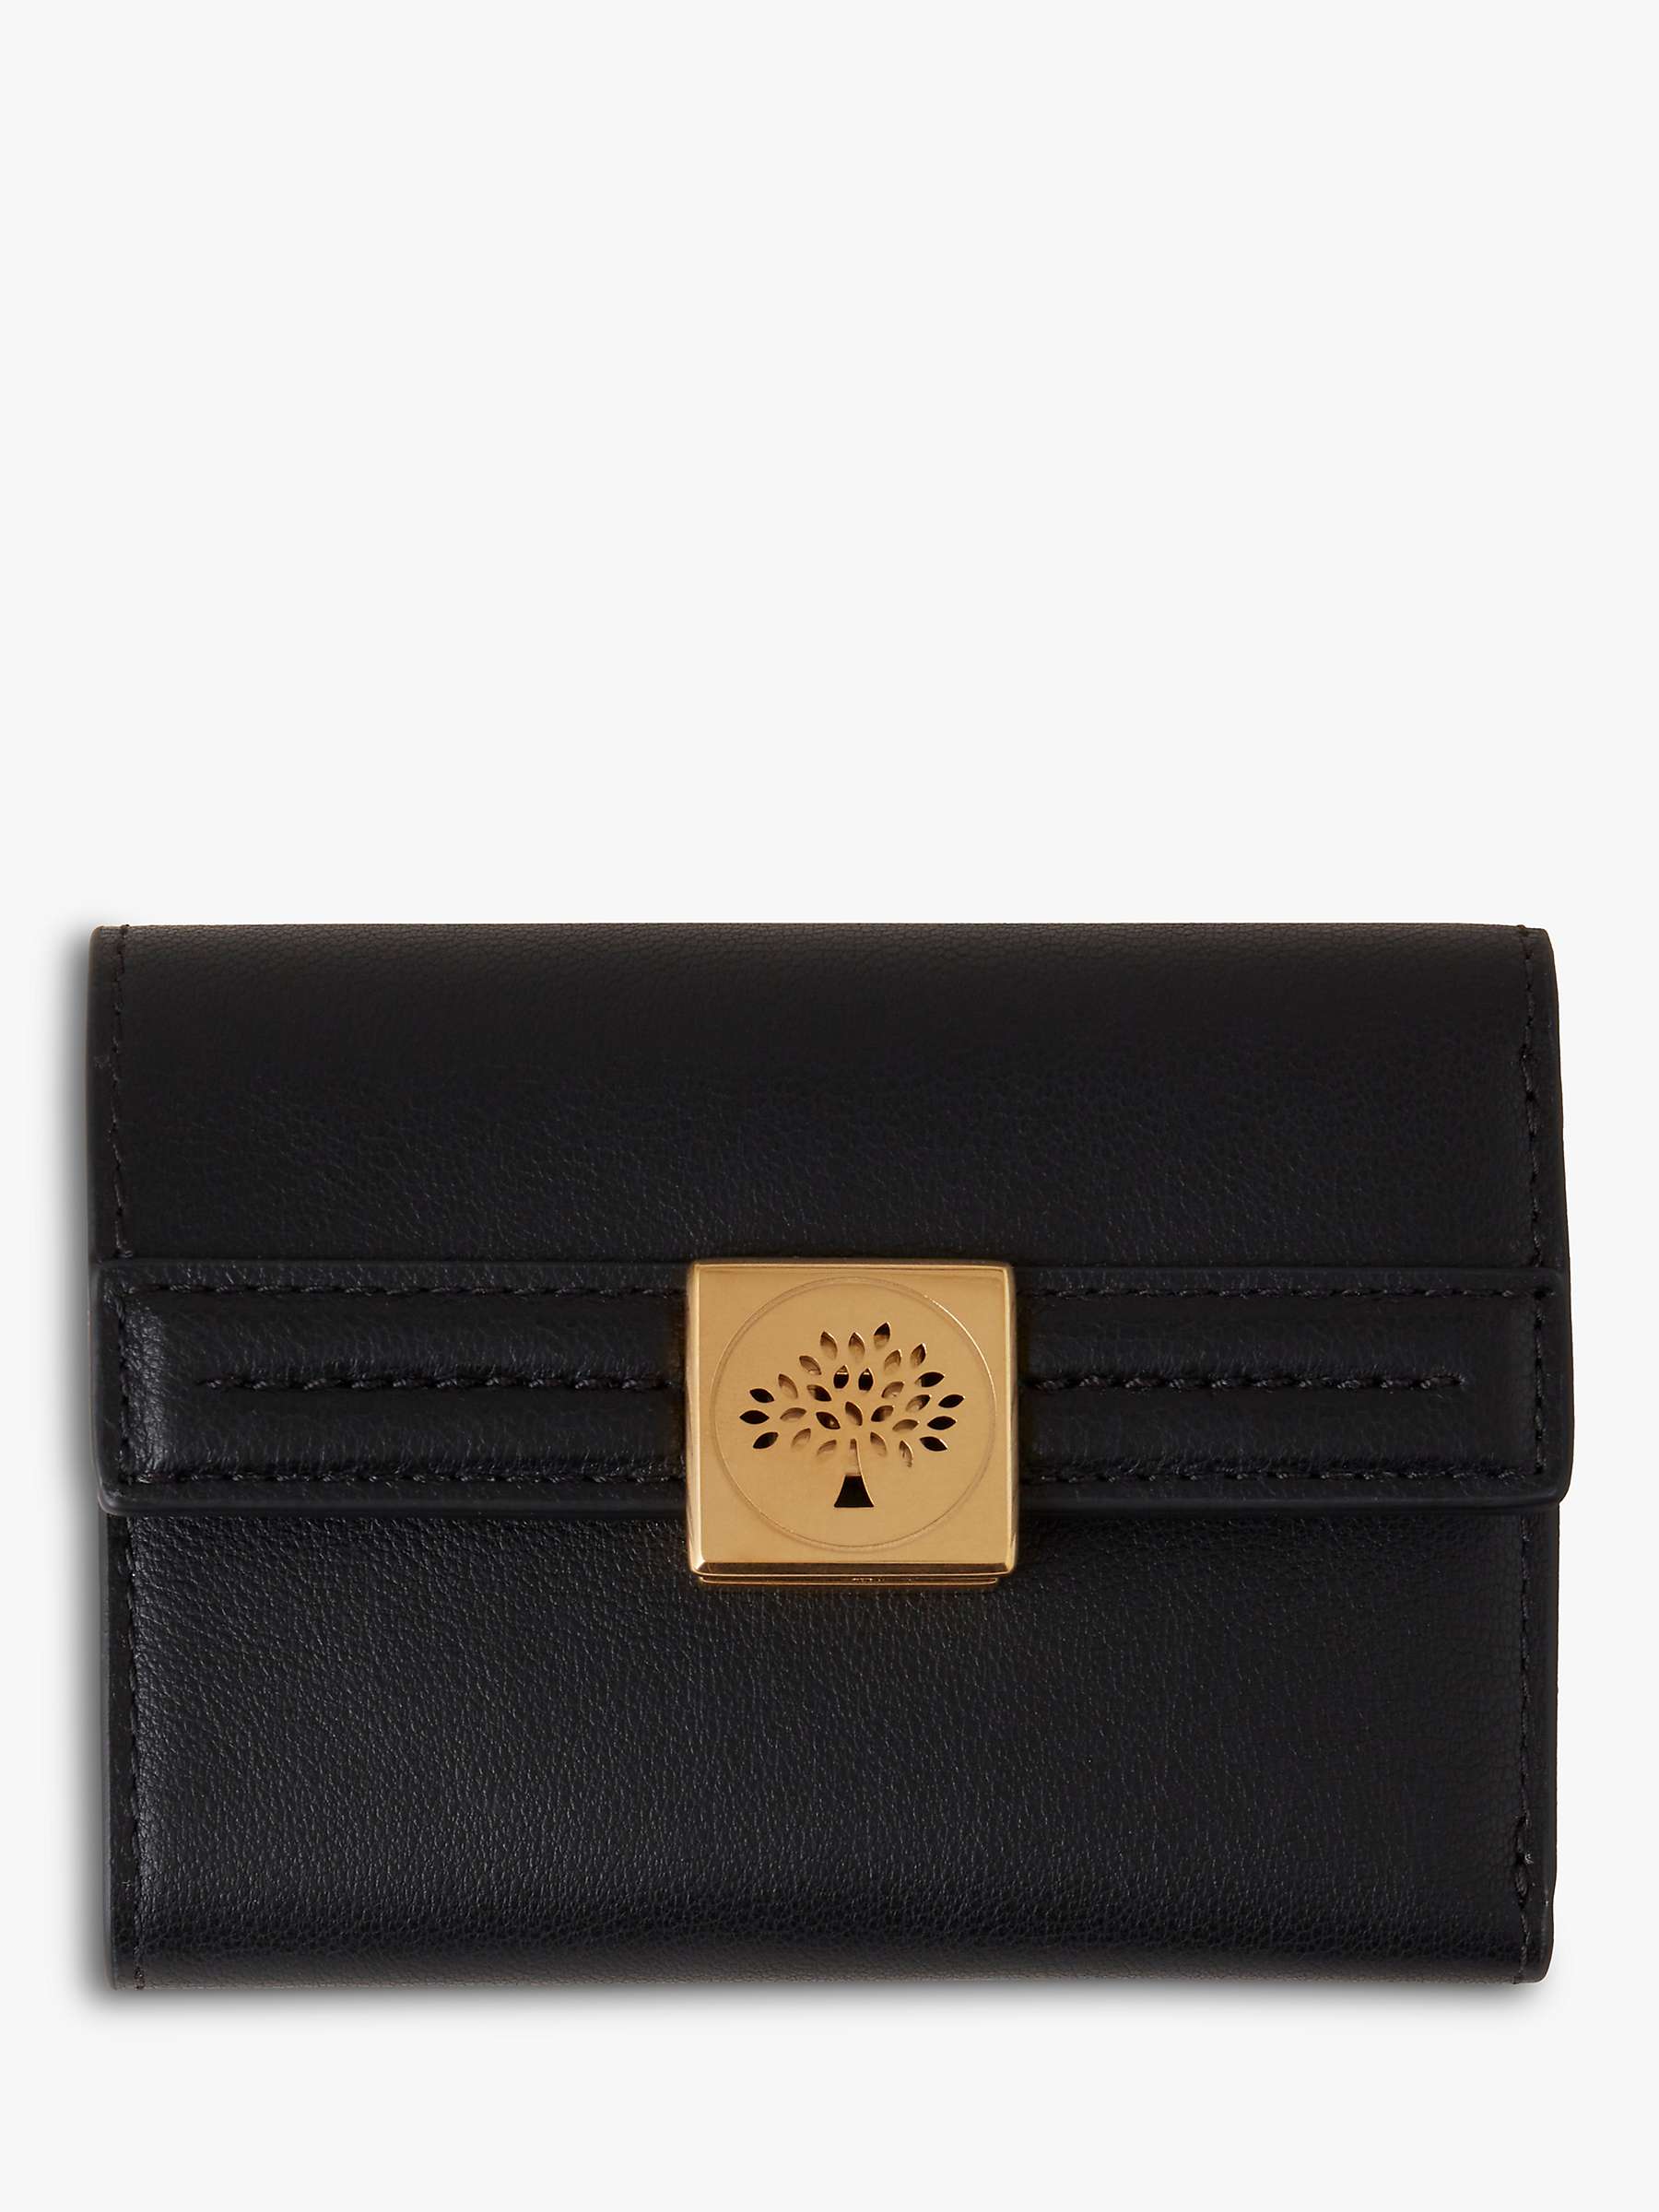 Buy Mulberry Tree Micro Classic Grain Leather Trifold Purse Online at johnlewis.com